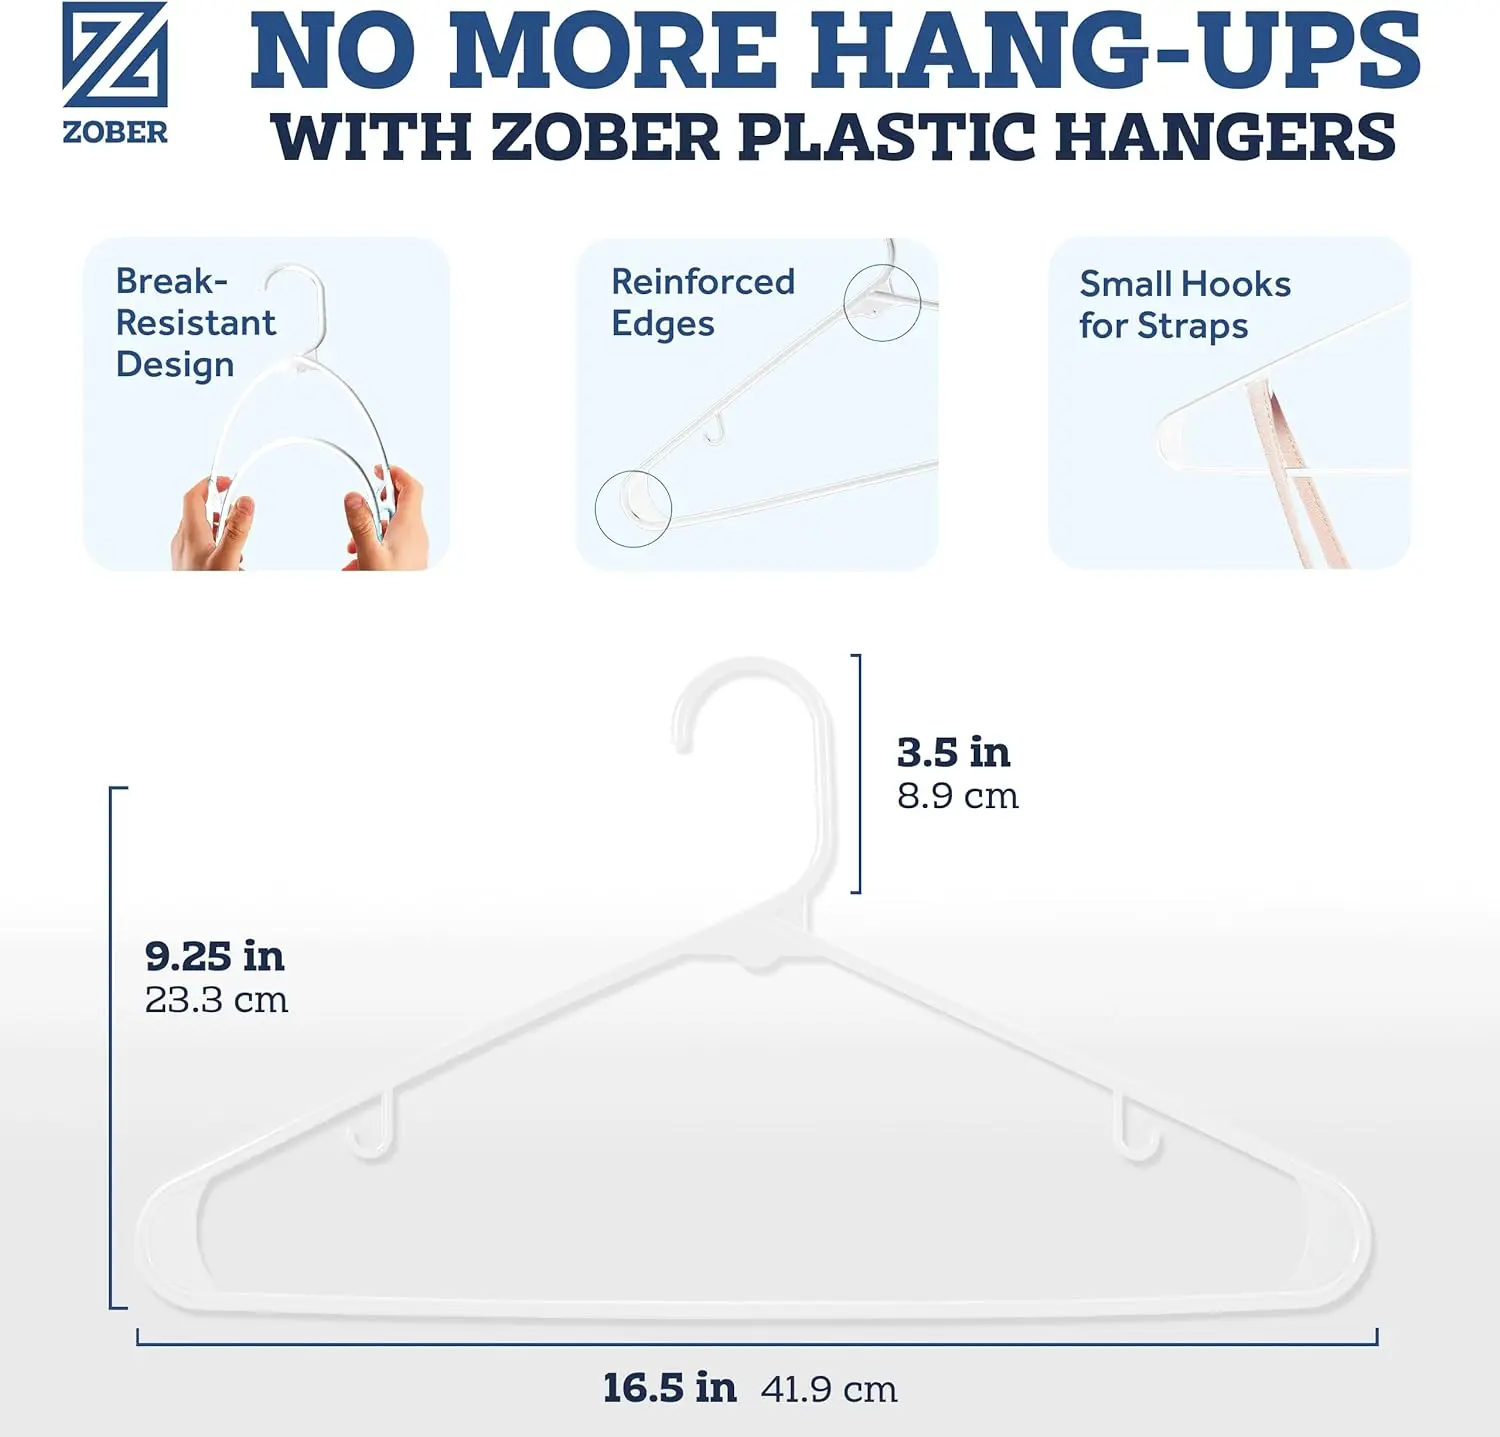 https://ae01.alicdn.com/kf/Sdfa5cabce24f4f9eb4fda9a58ef9cce1x/Plastic-Hangers-100-Pack-White-Plastic-Hangers-Space-Saving-Clothes-Hangers-for-Shirts-Pants-for-Everyday.jpg